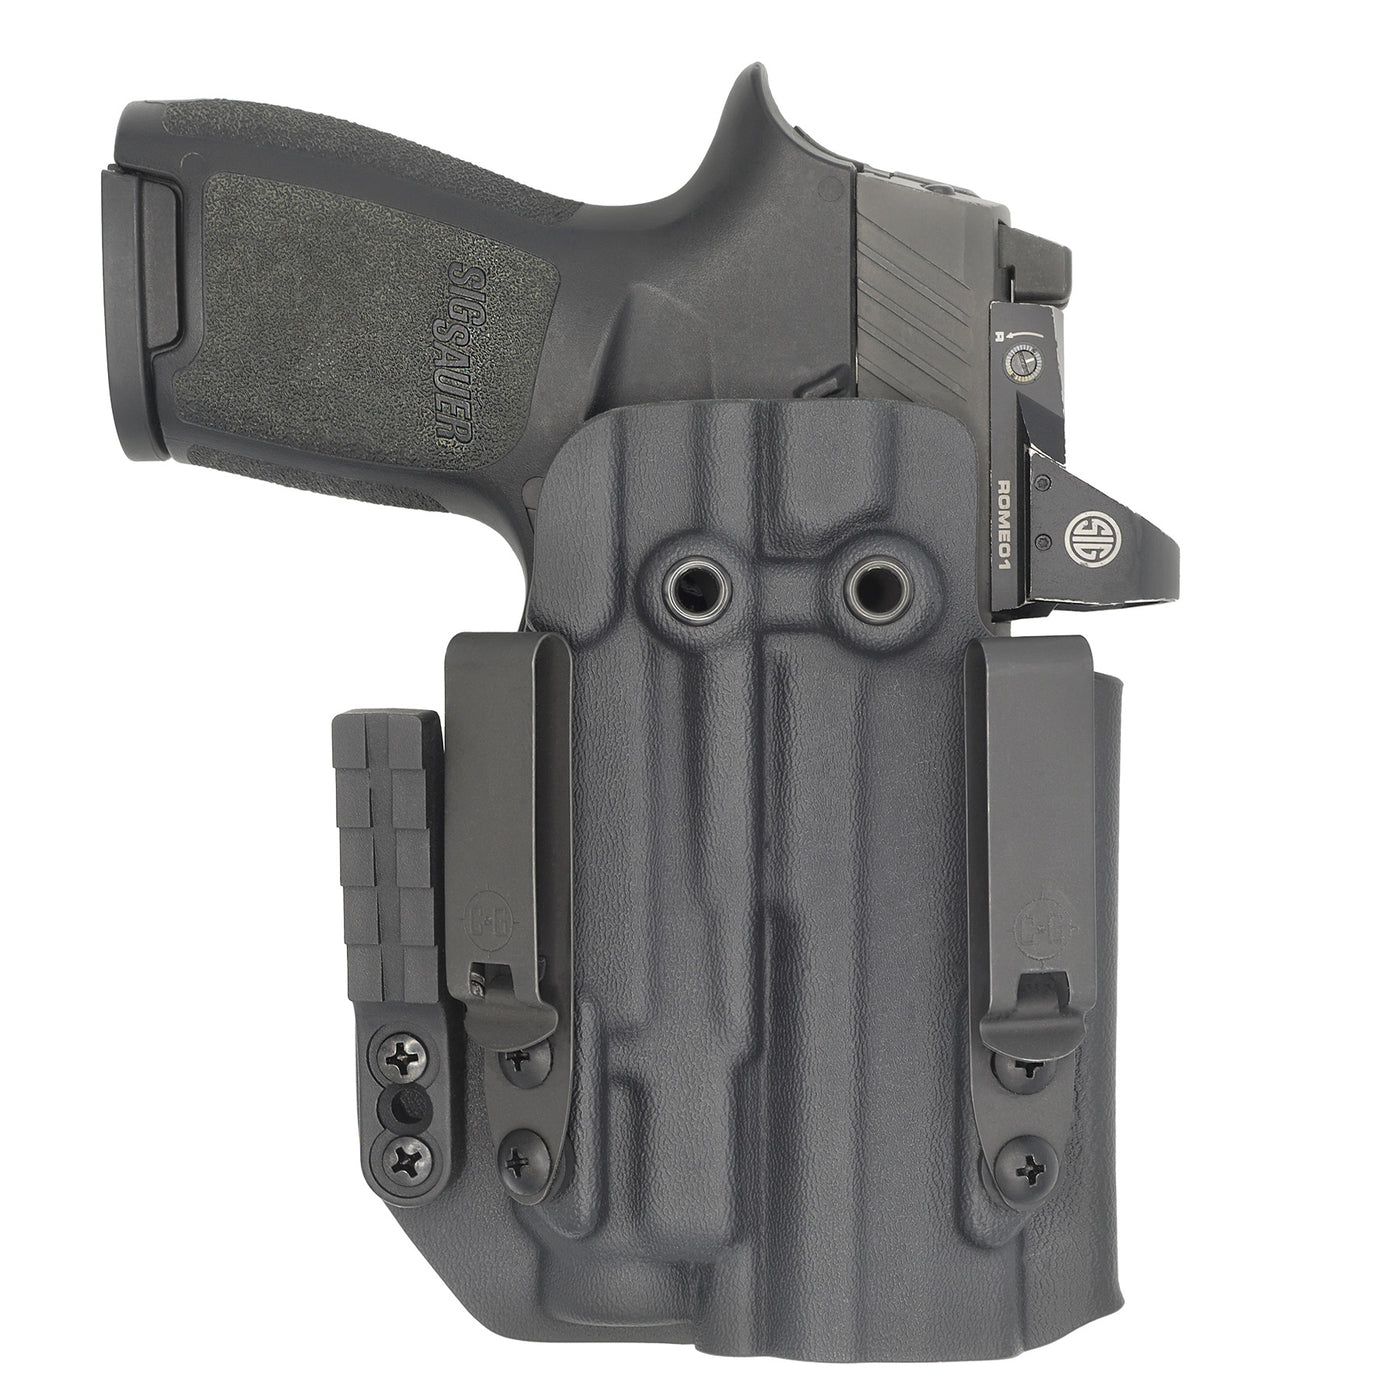 C&G Holsters custom IWB ALPHA UPGRADE Tactical Sig P320/c Streamlight TLR7/a in holstered position